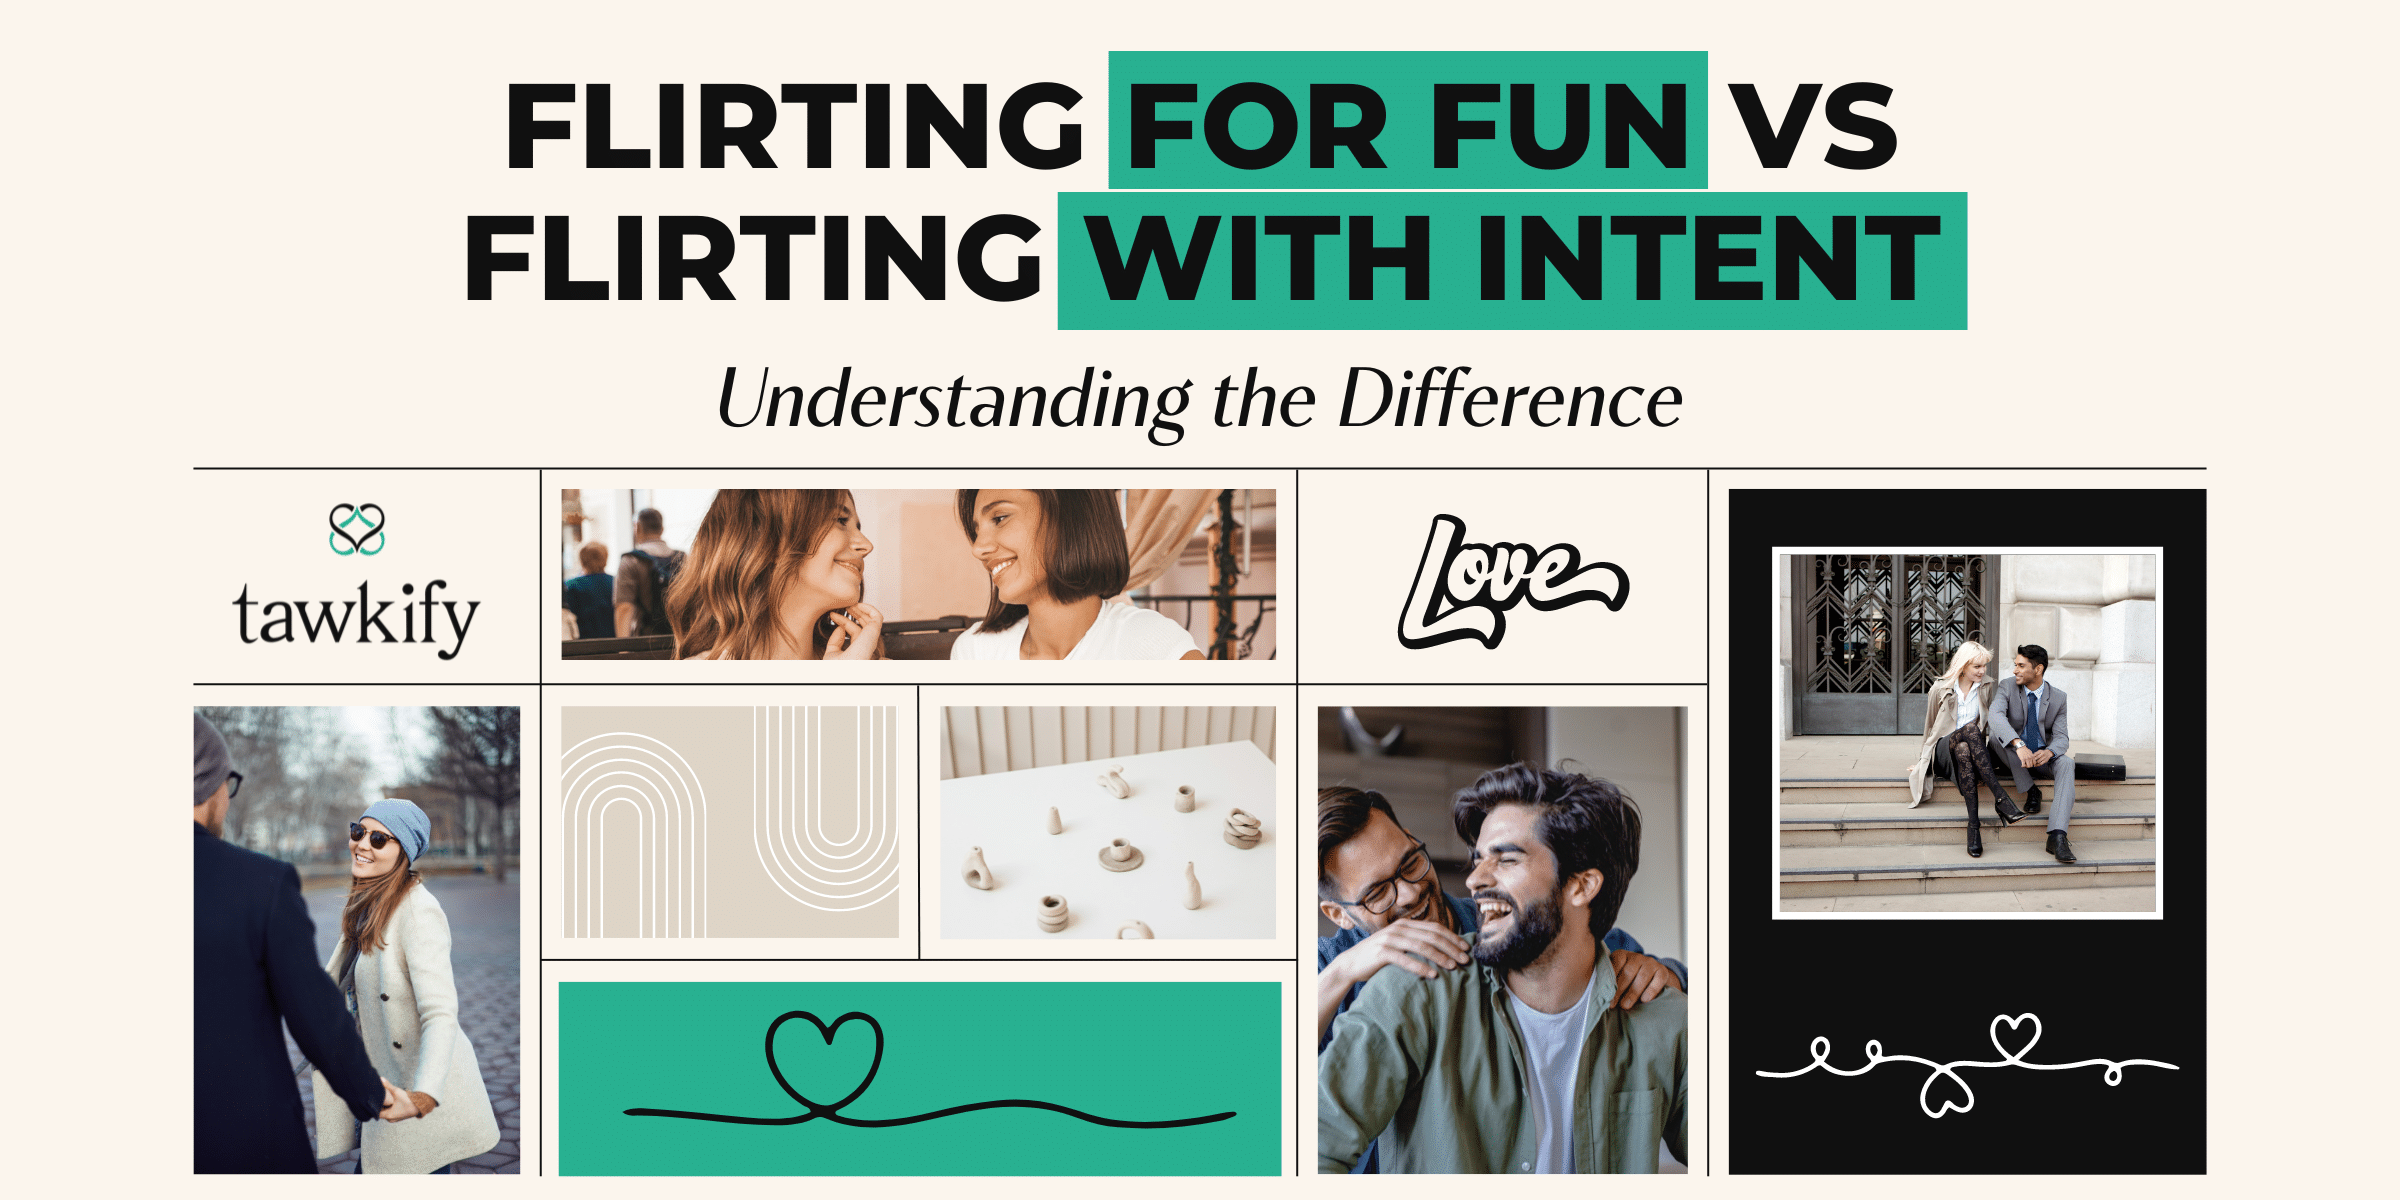 Get your flirting radar ready! Learn the nuances of flirting for fun vs. flirting with intent. Keep reading to find out.